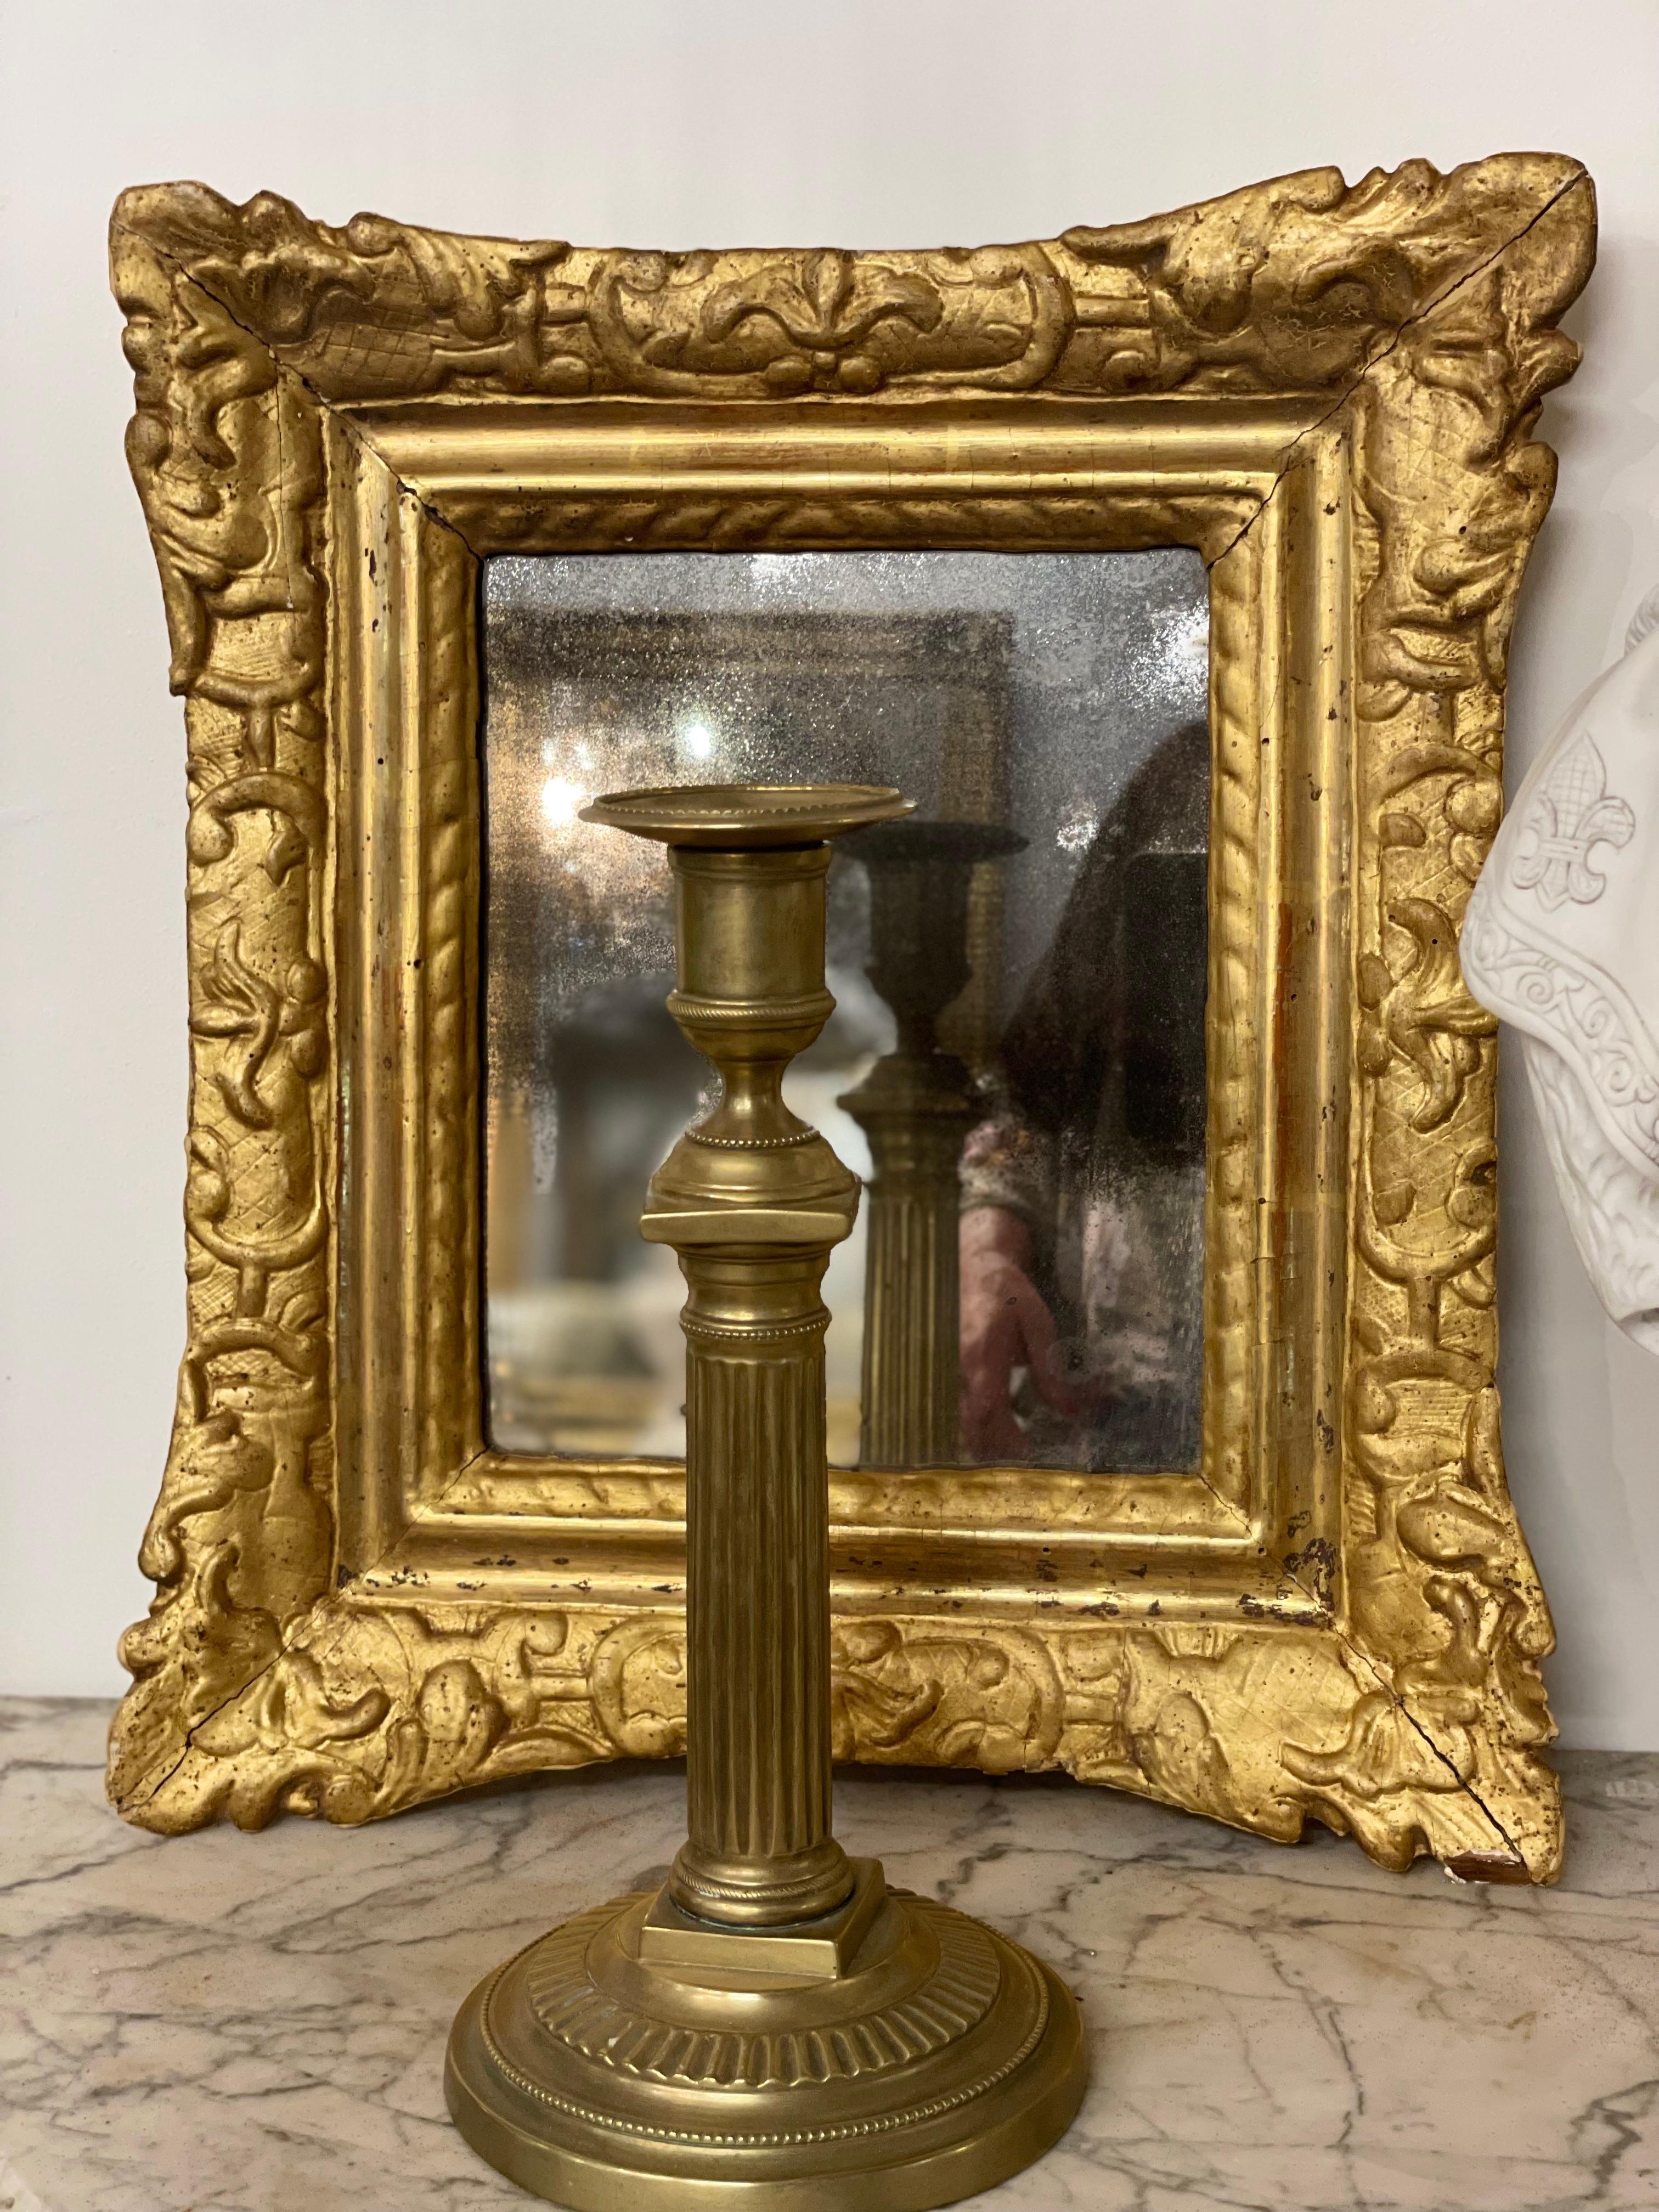 Louis XVI 18th Century Giltwood Wall Mirror, with An Ornate Flared-Cornered 